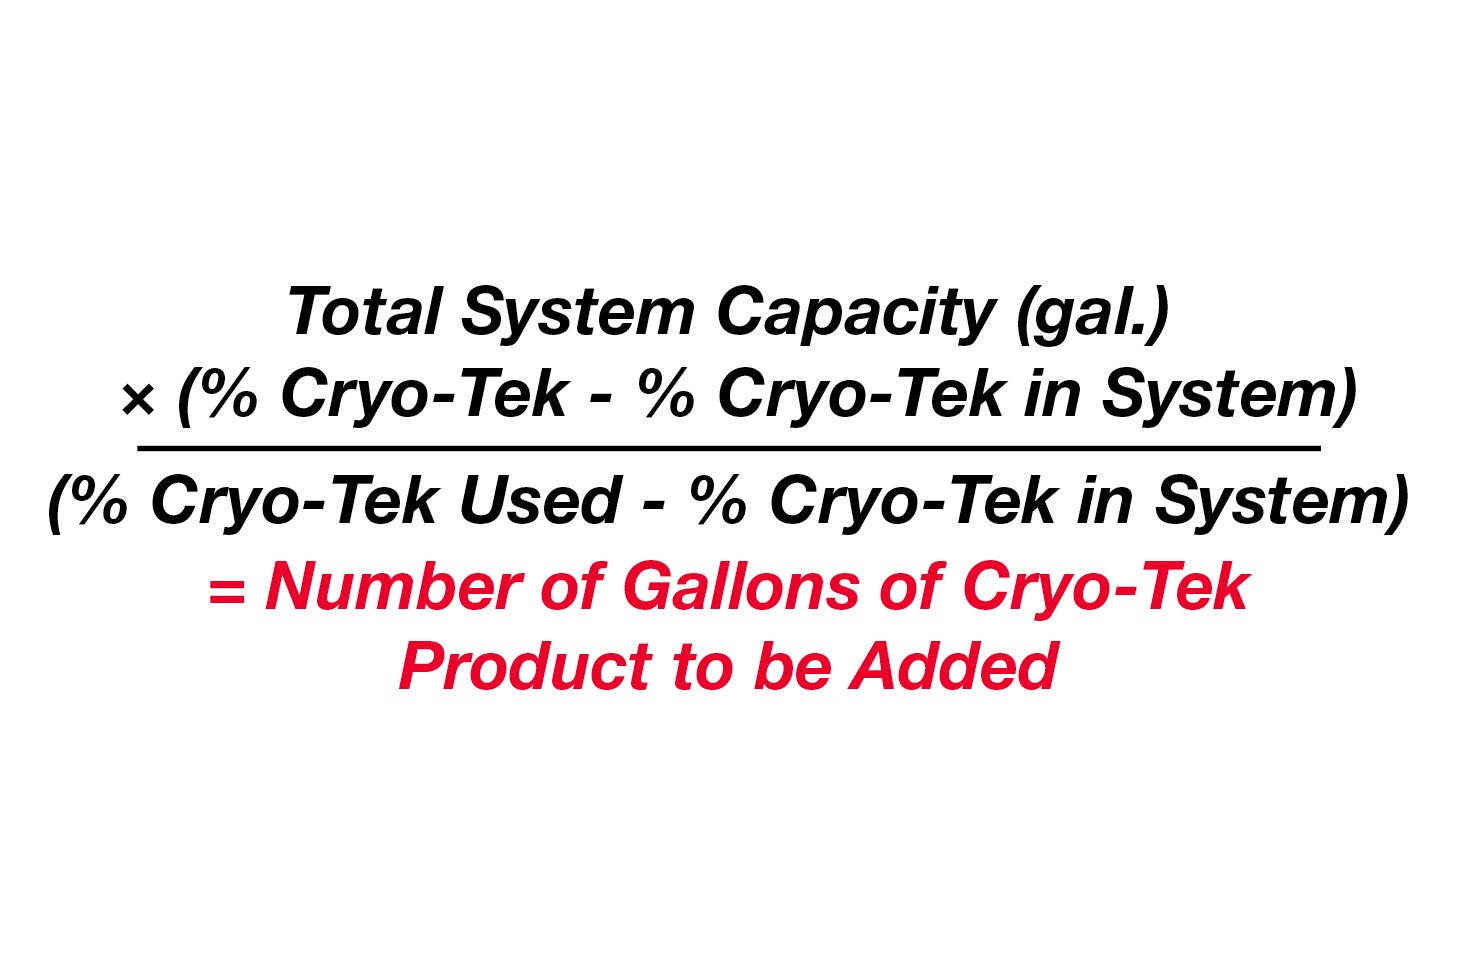 How much anti-freeze Cryo-tek should I use in my system